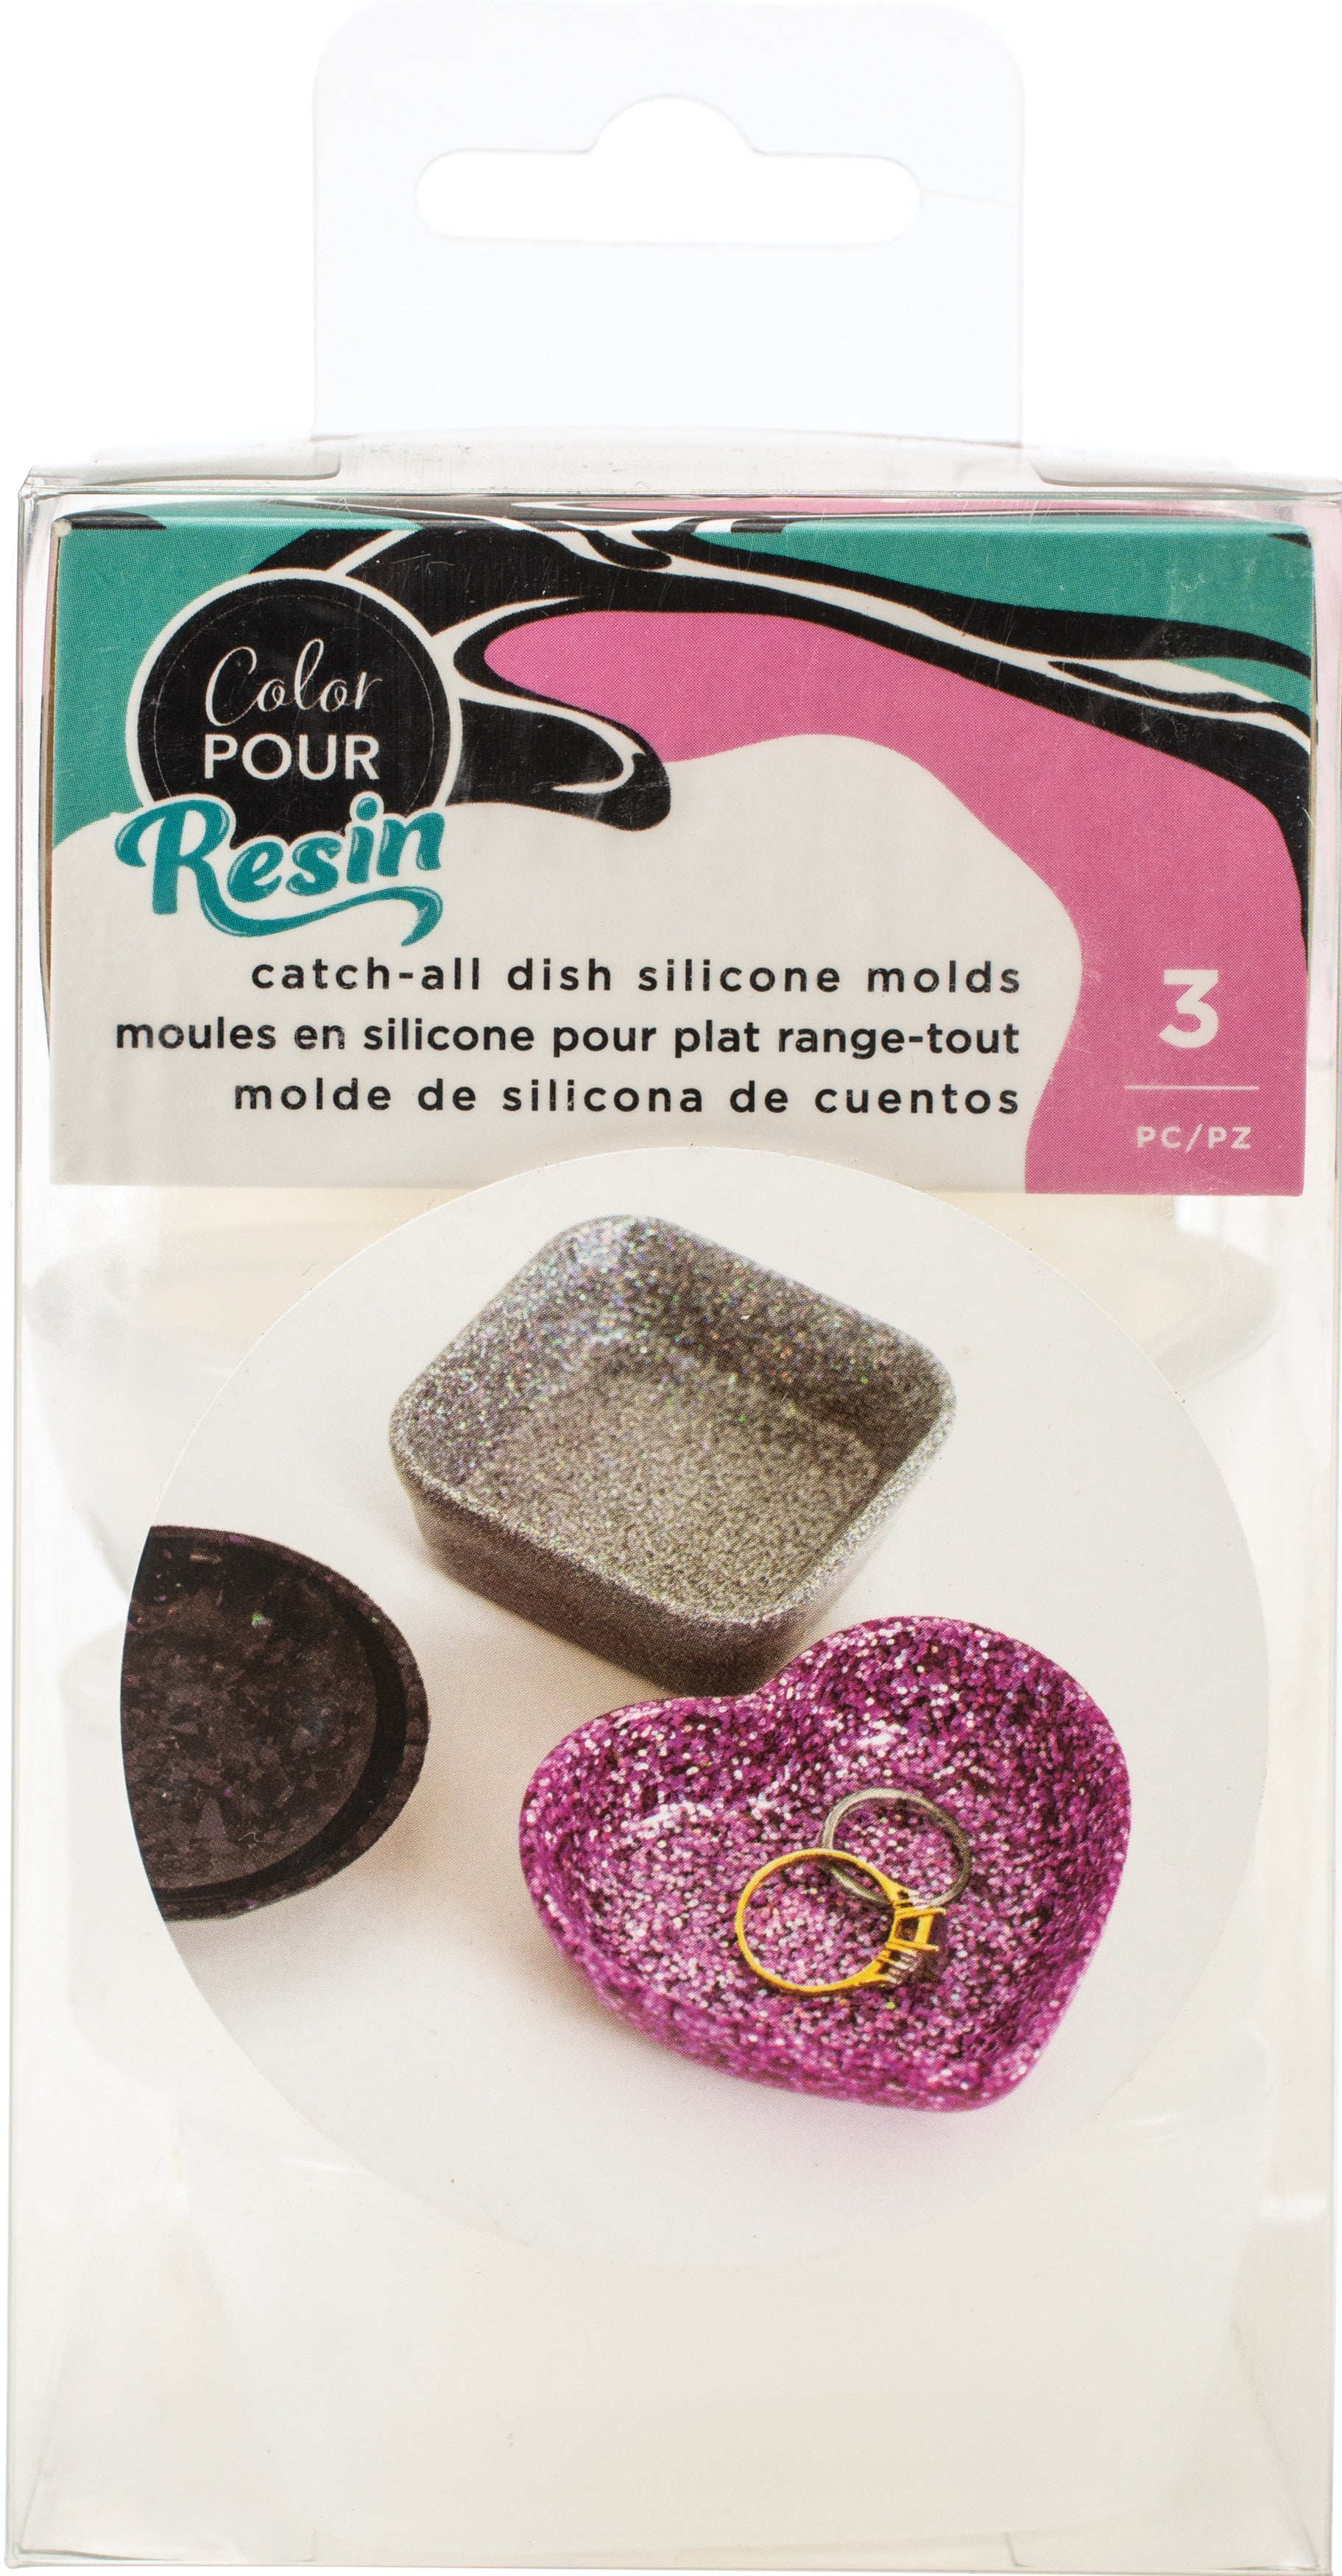 American Crafts Color Pour Resin Silicone Mold Maker- : .co